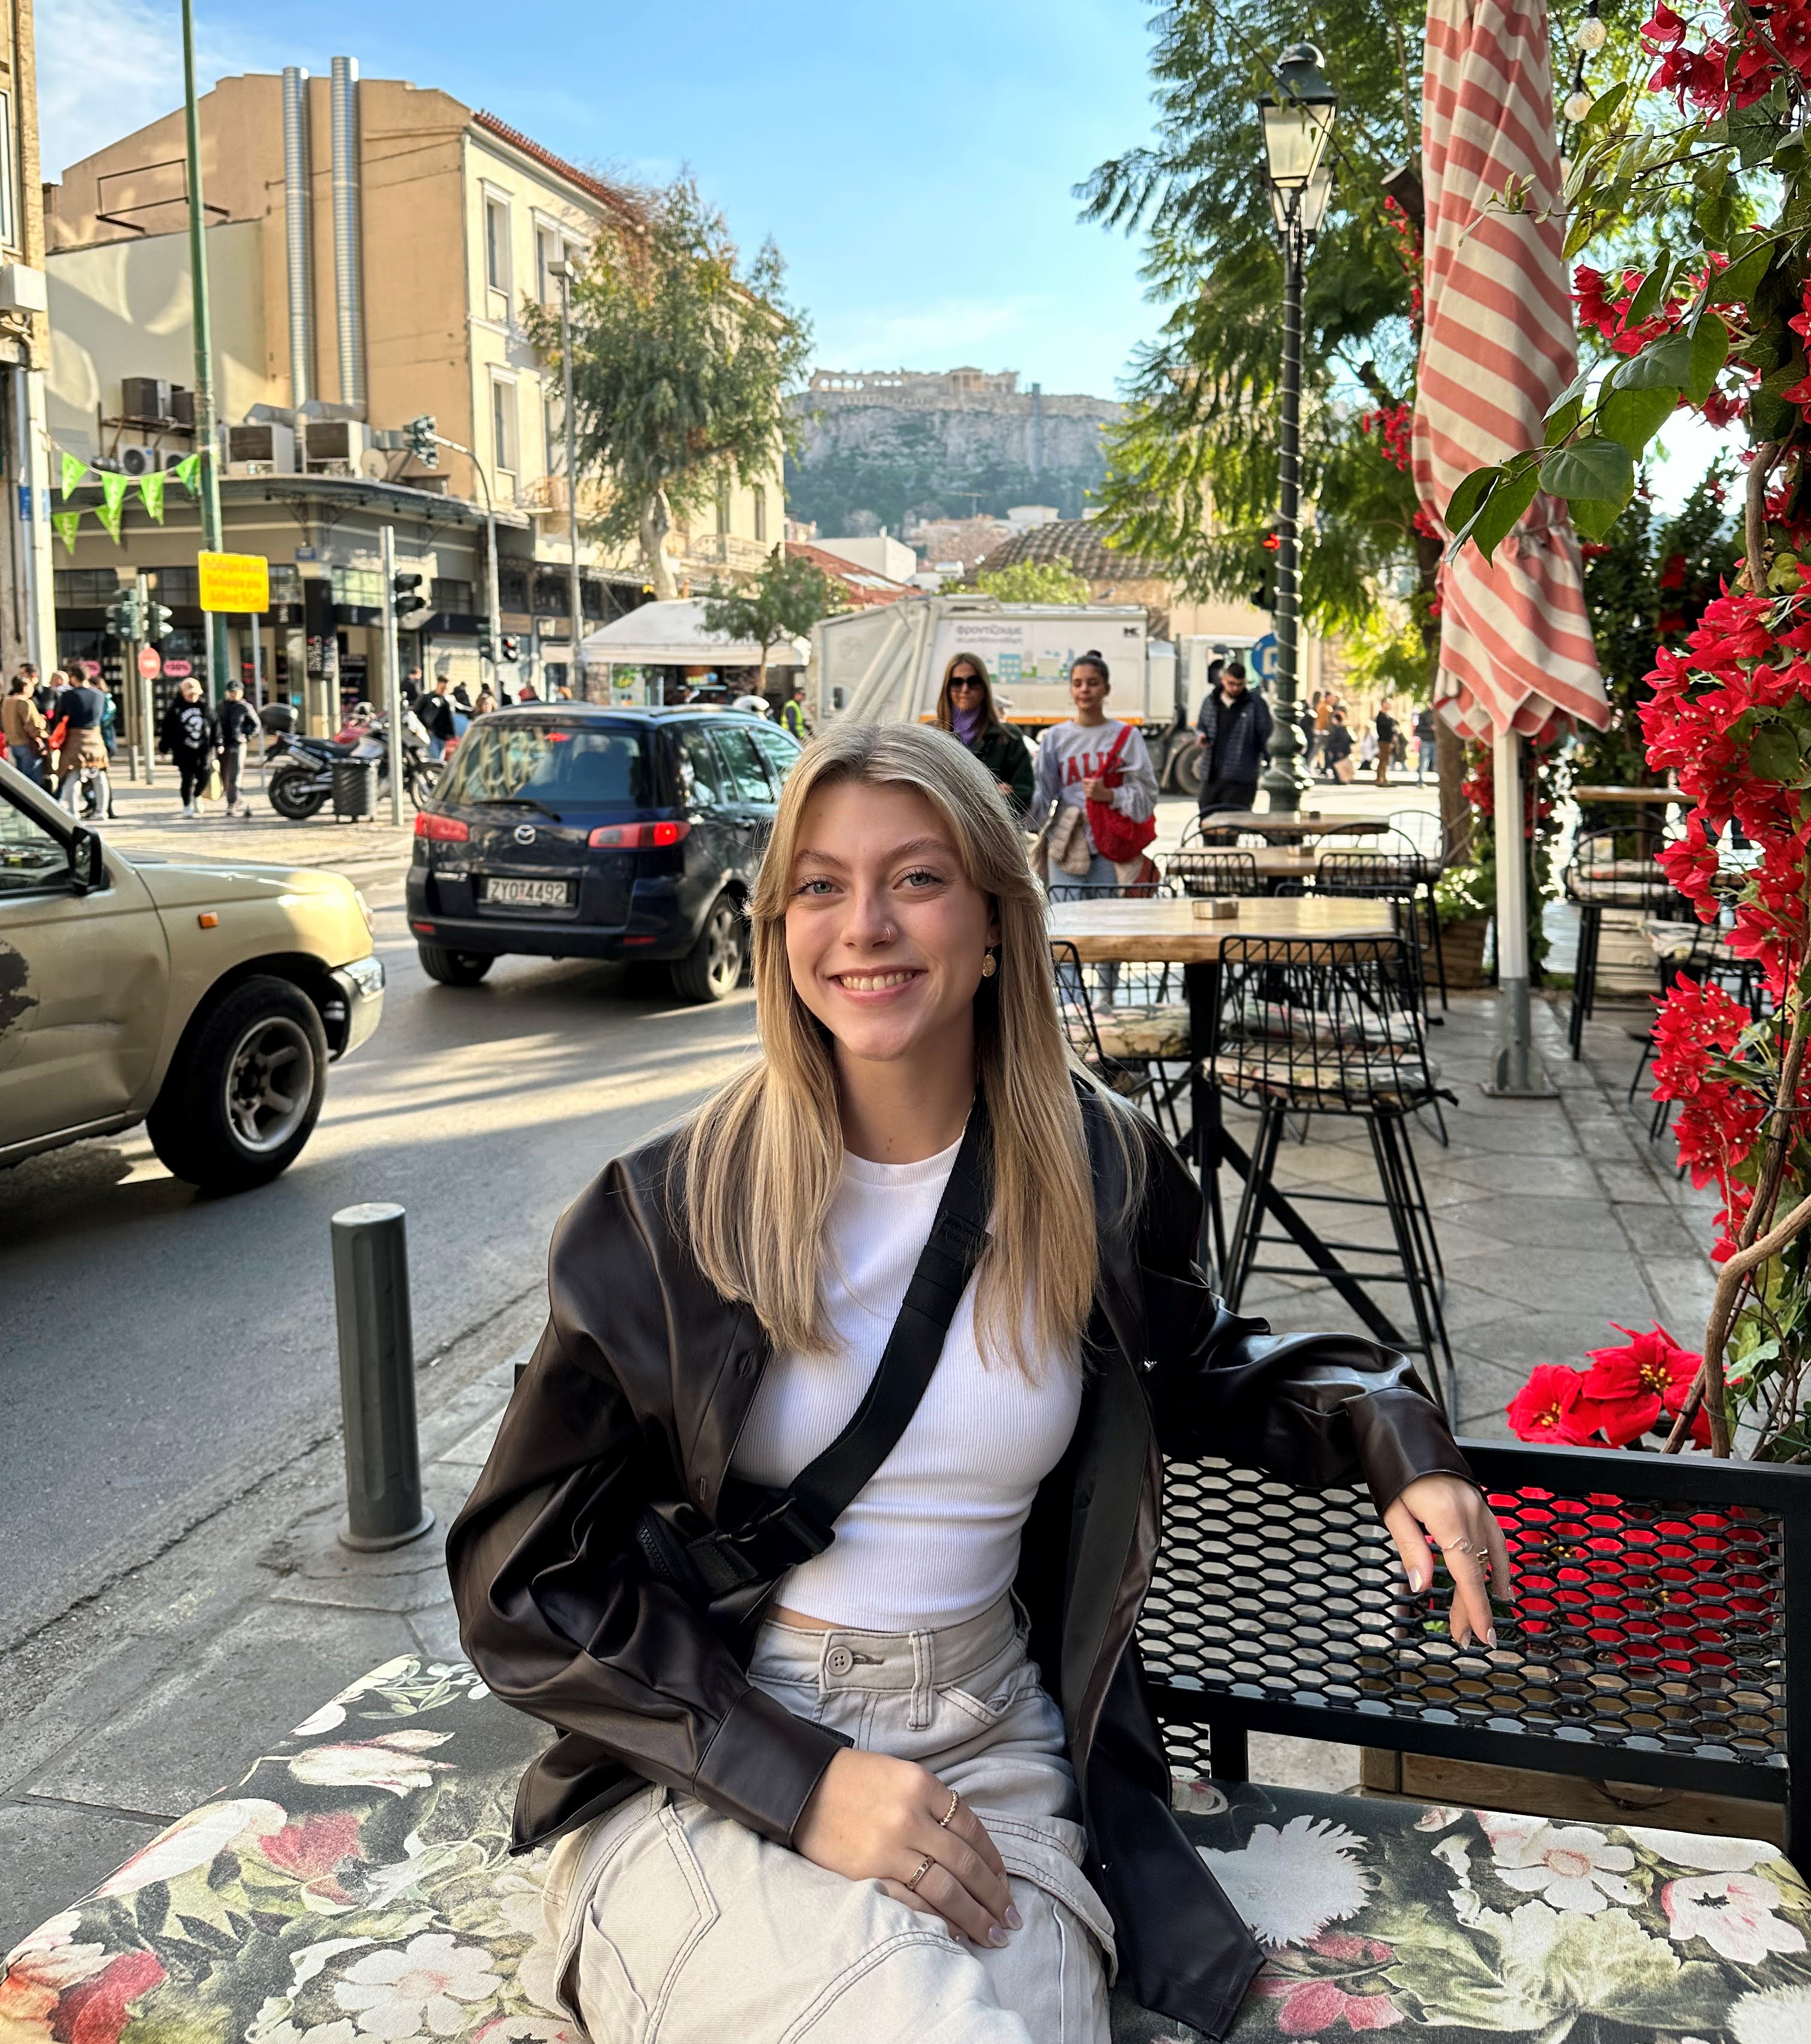 Sitting at a street cafe in Athens